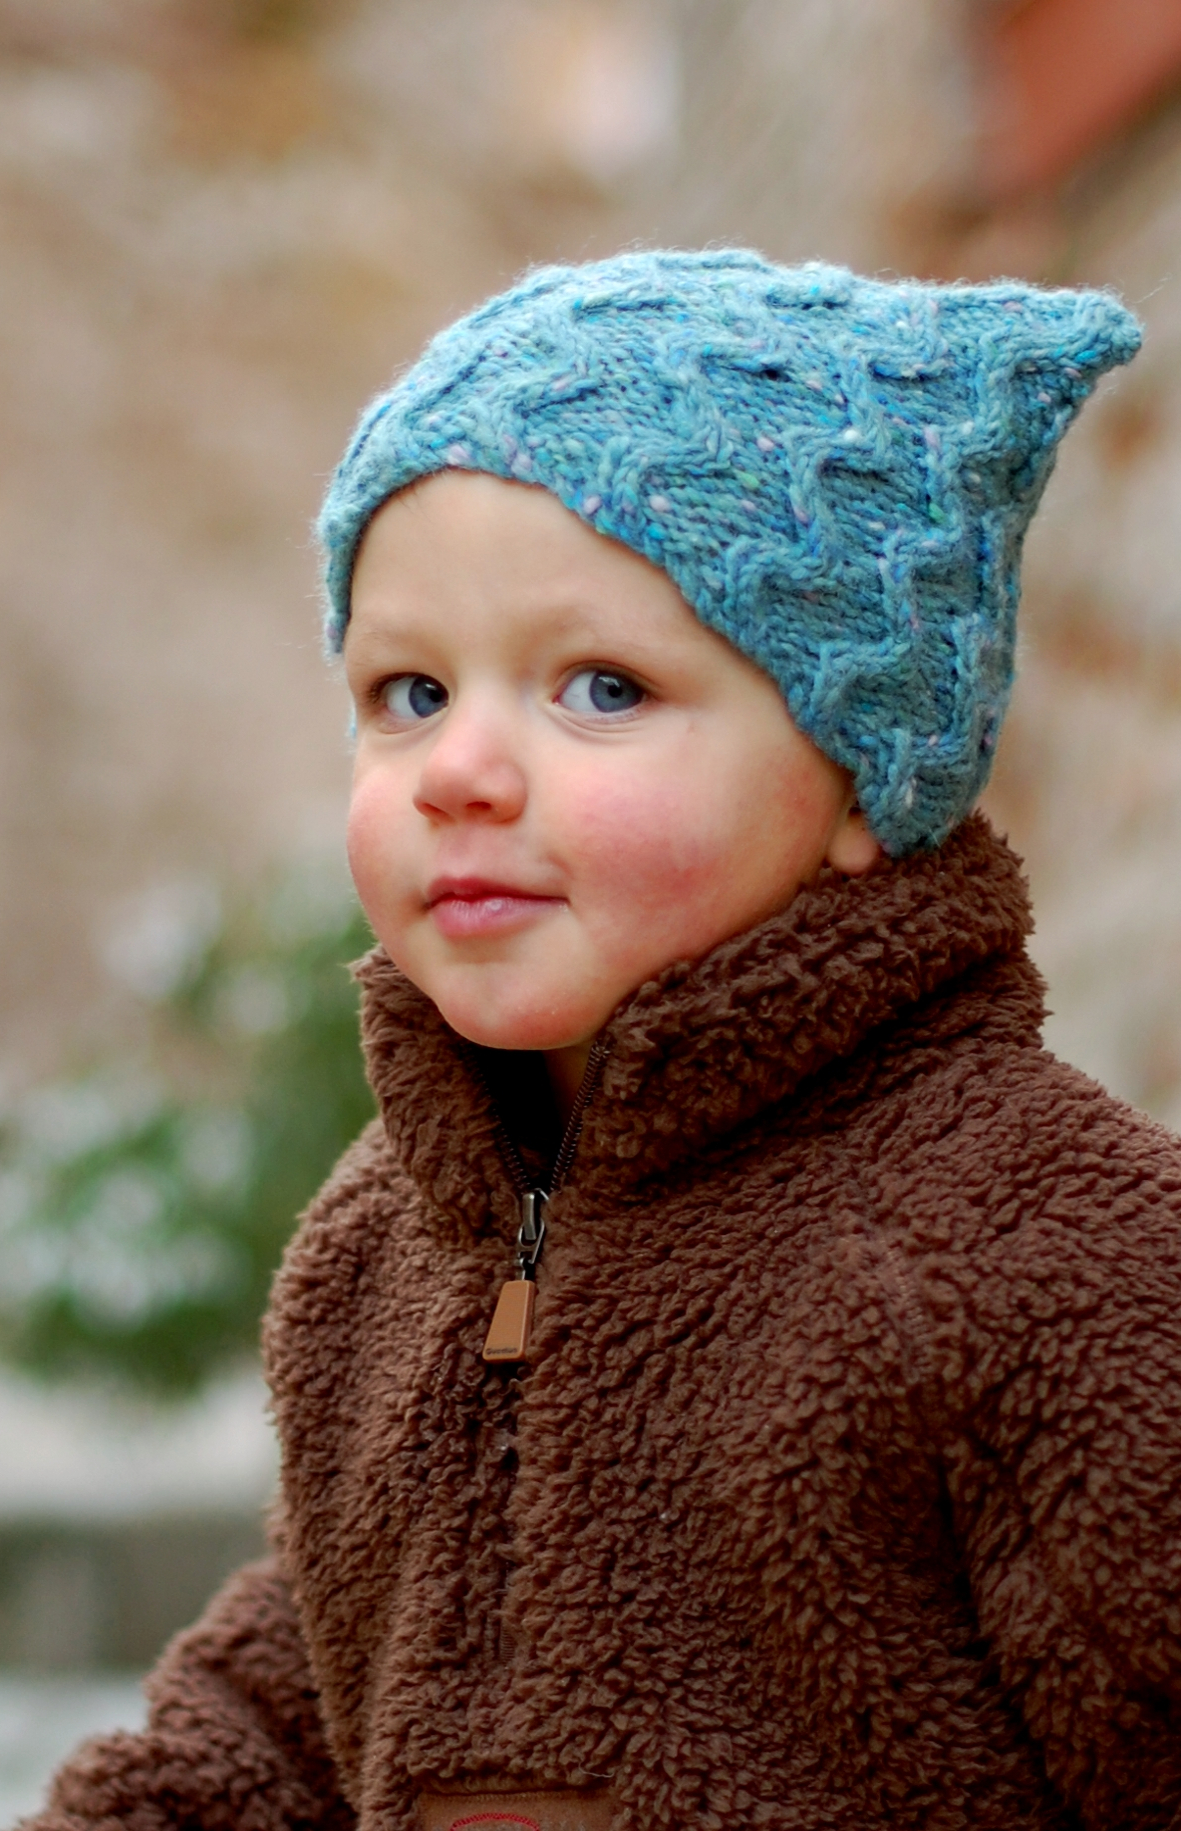 Tinker cabled Hat hand knitting pattern